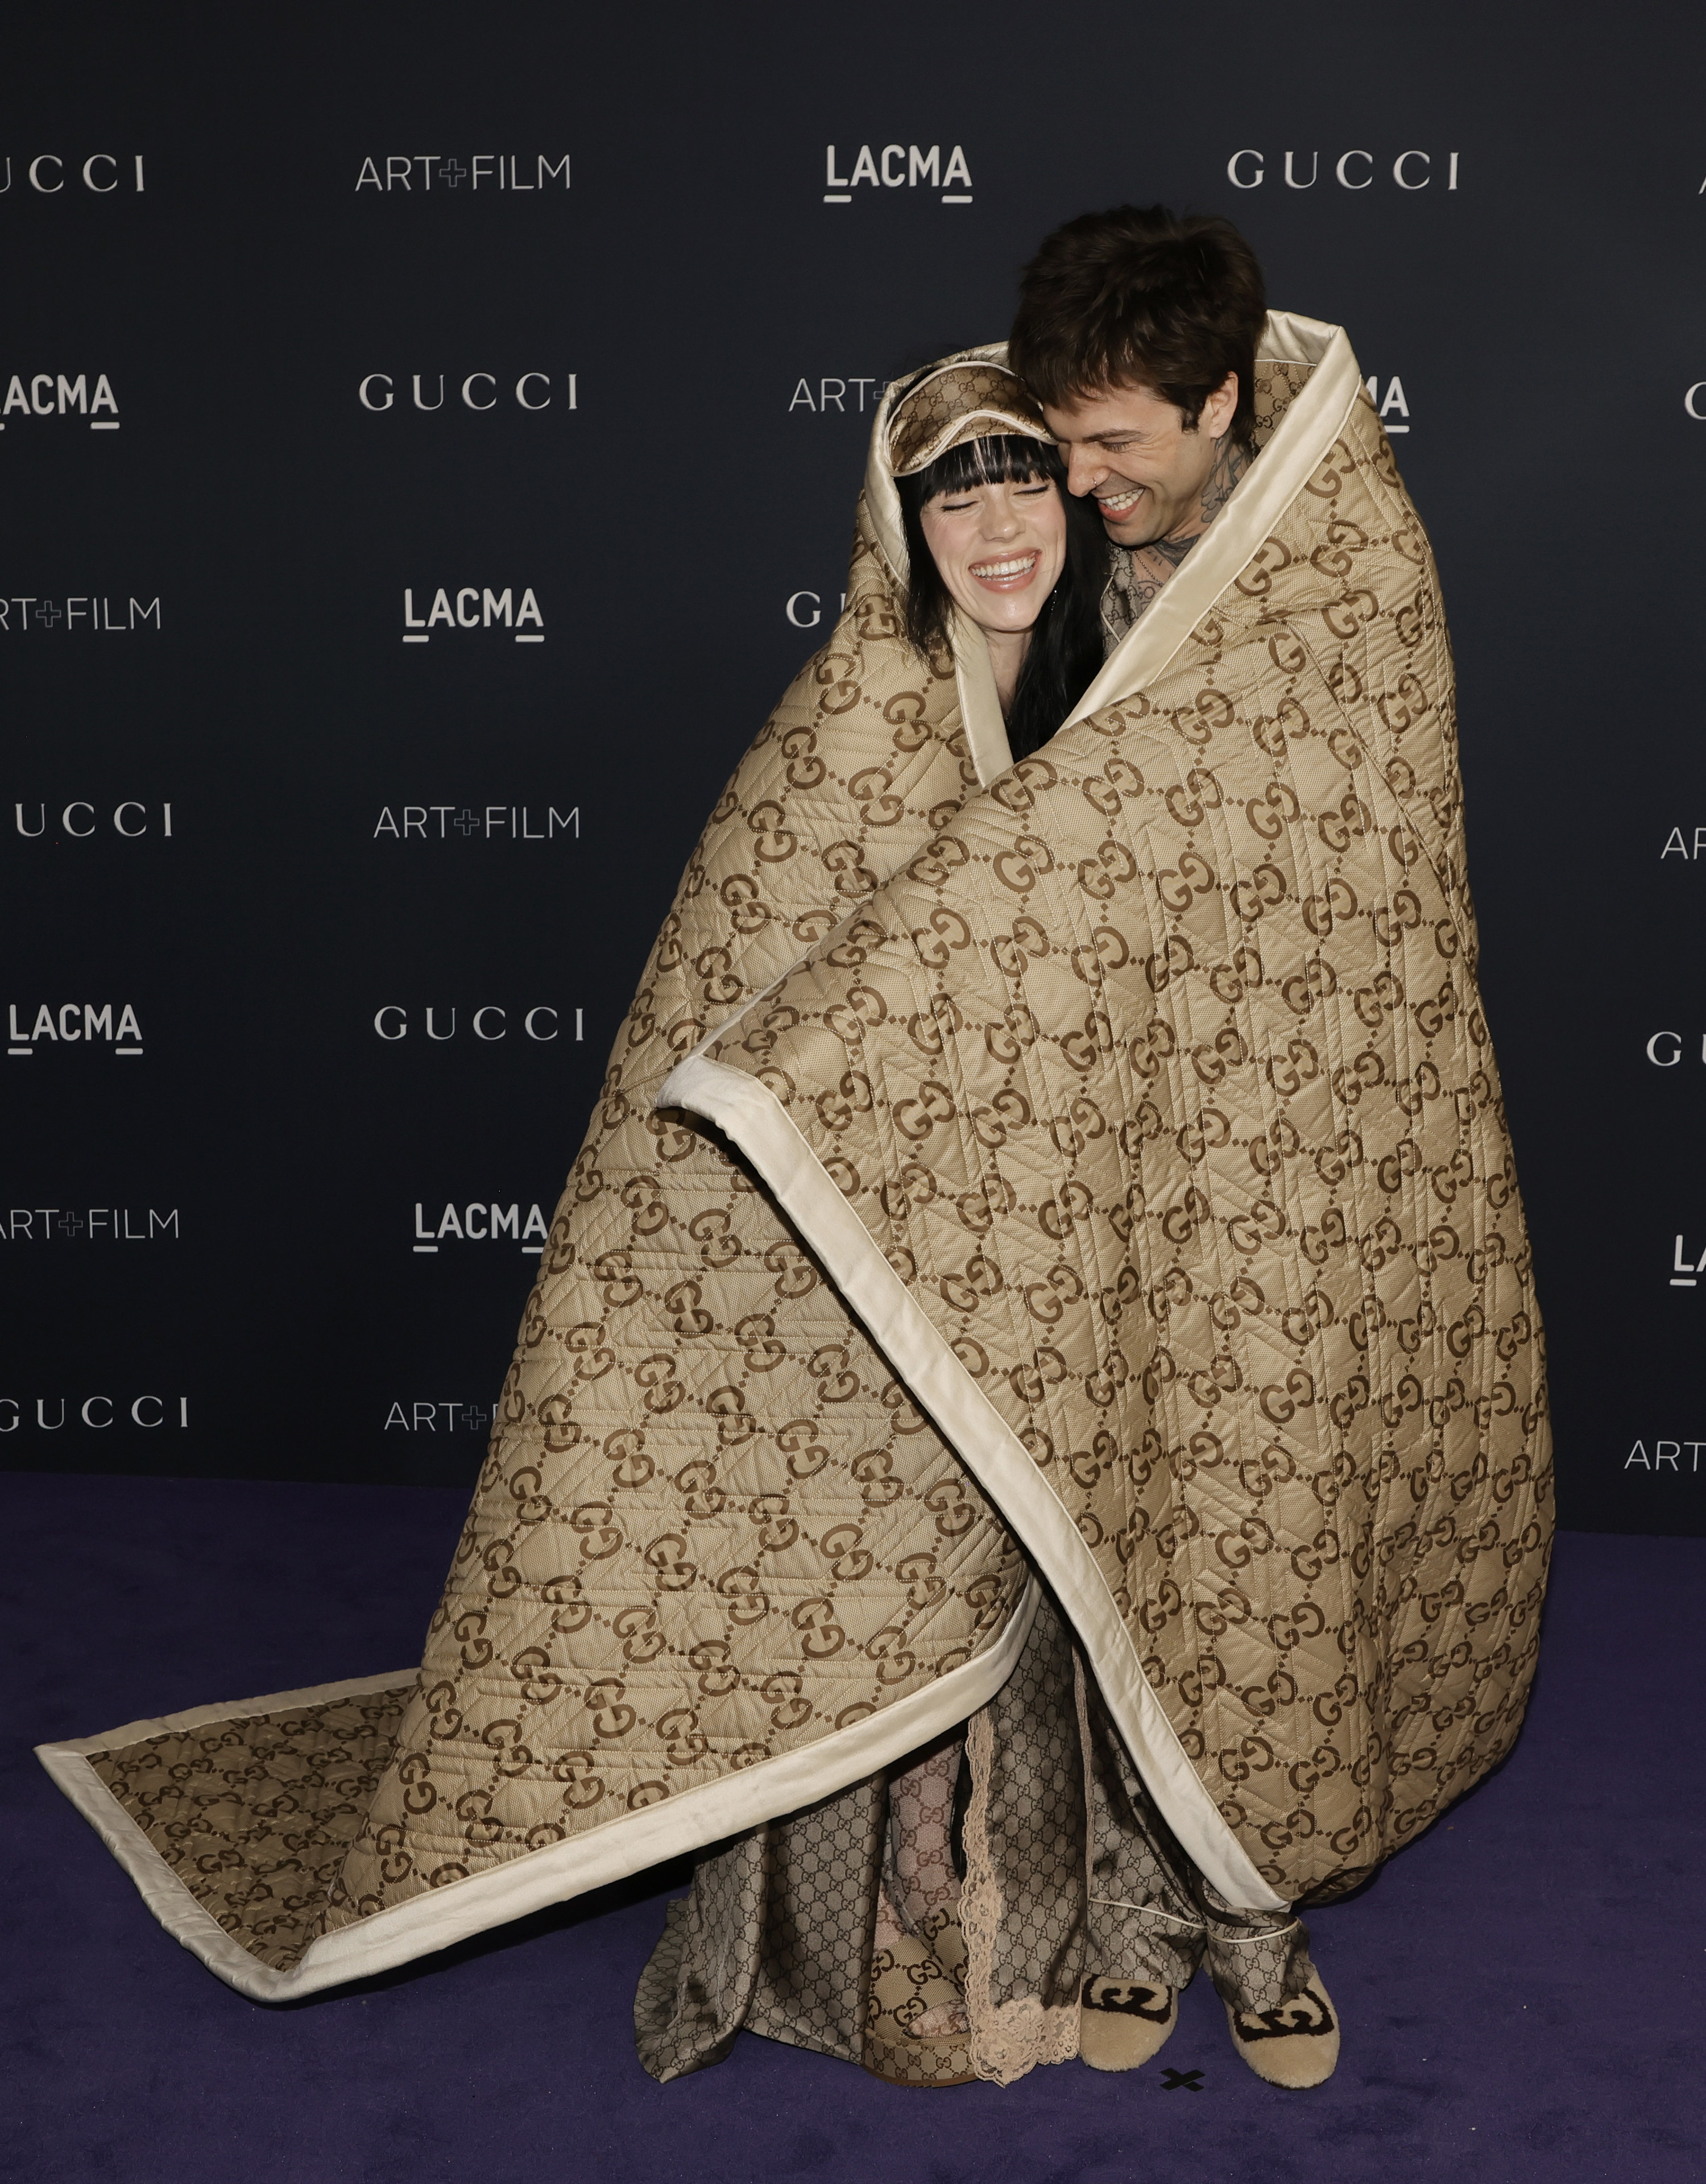 the two at an event wrapped in a large blanket